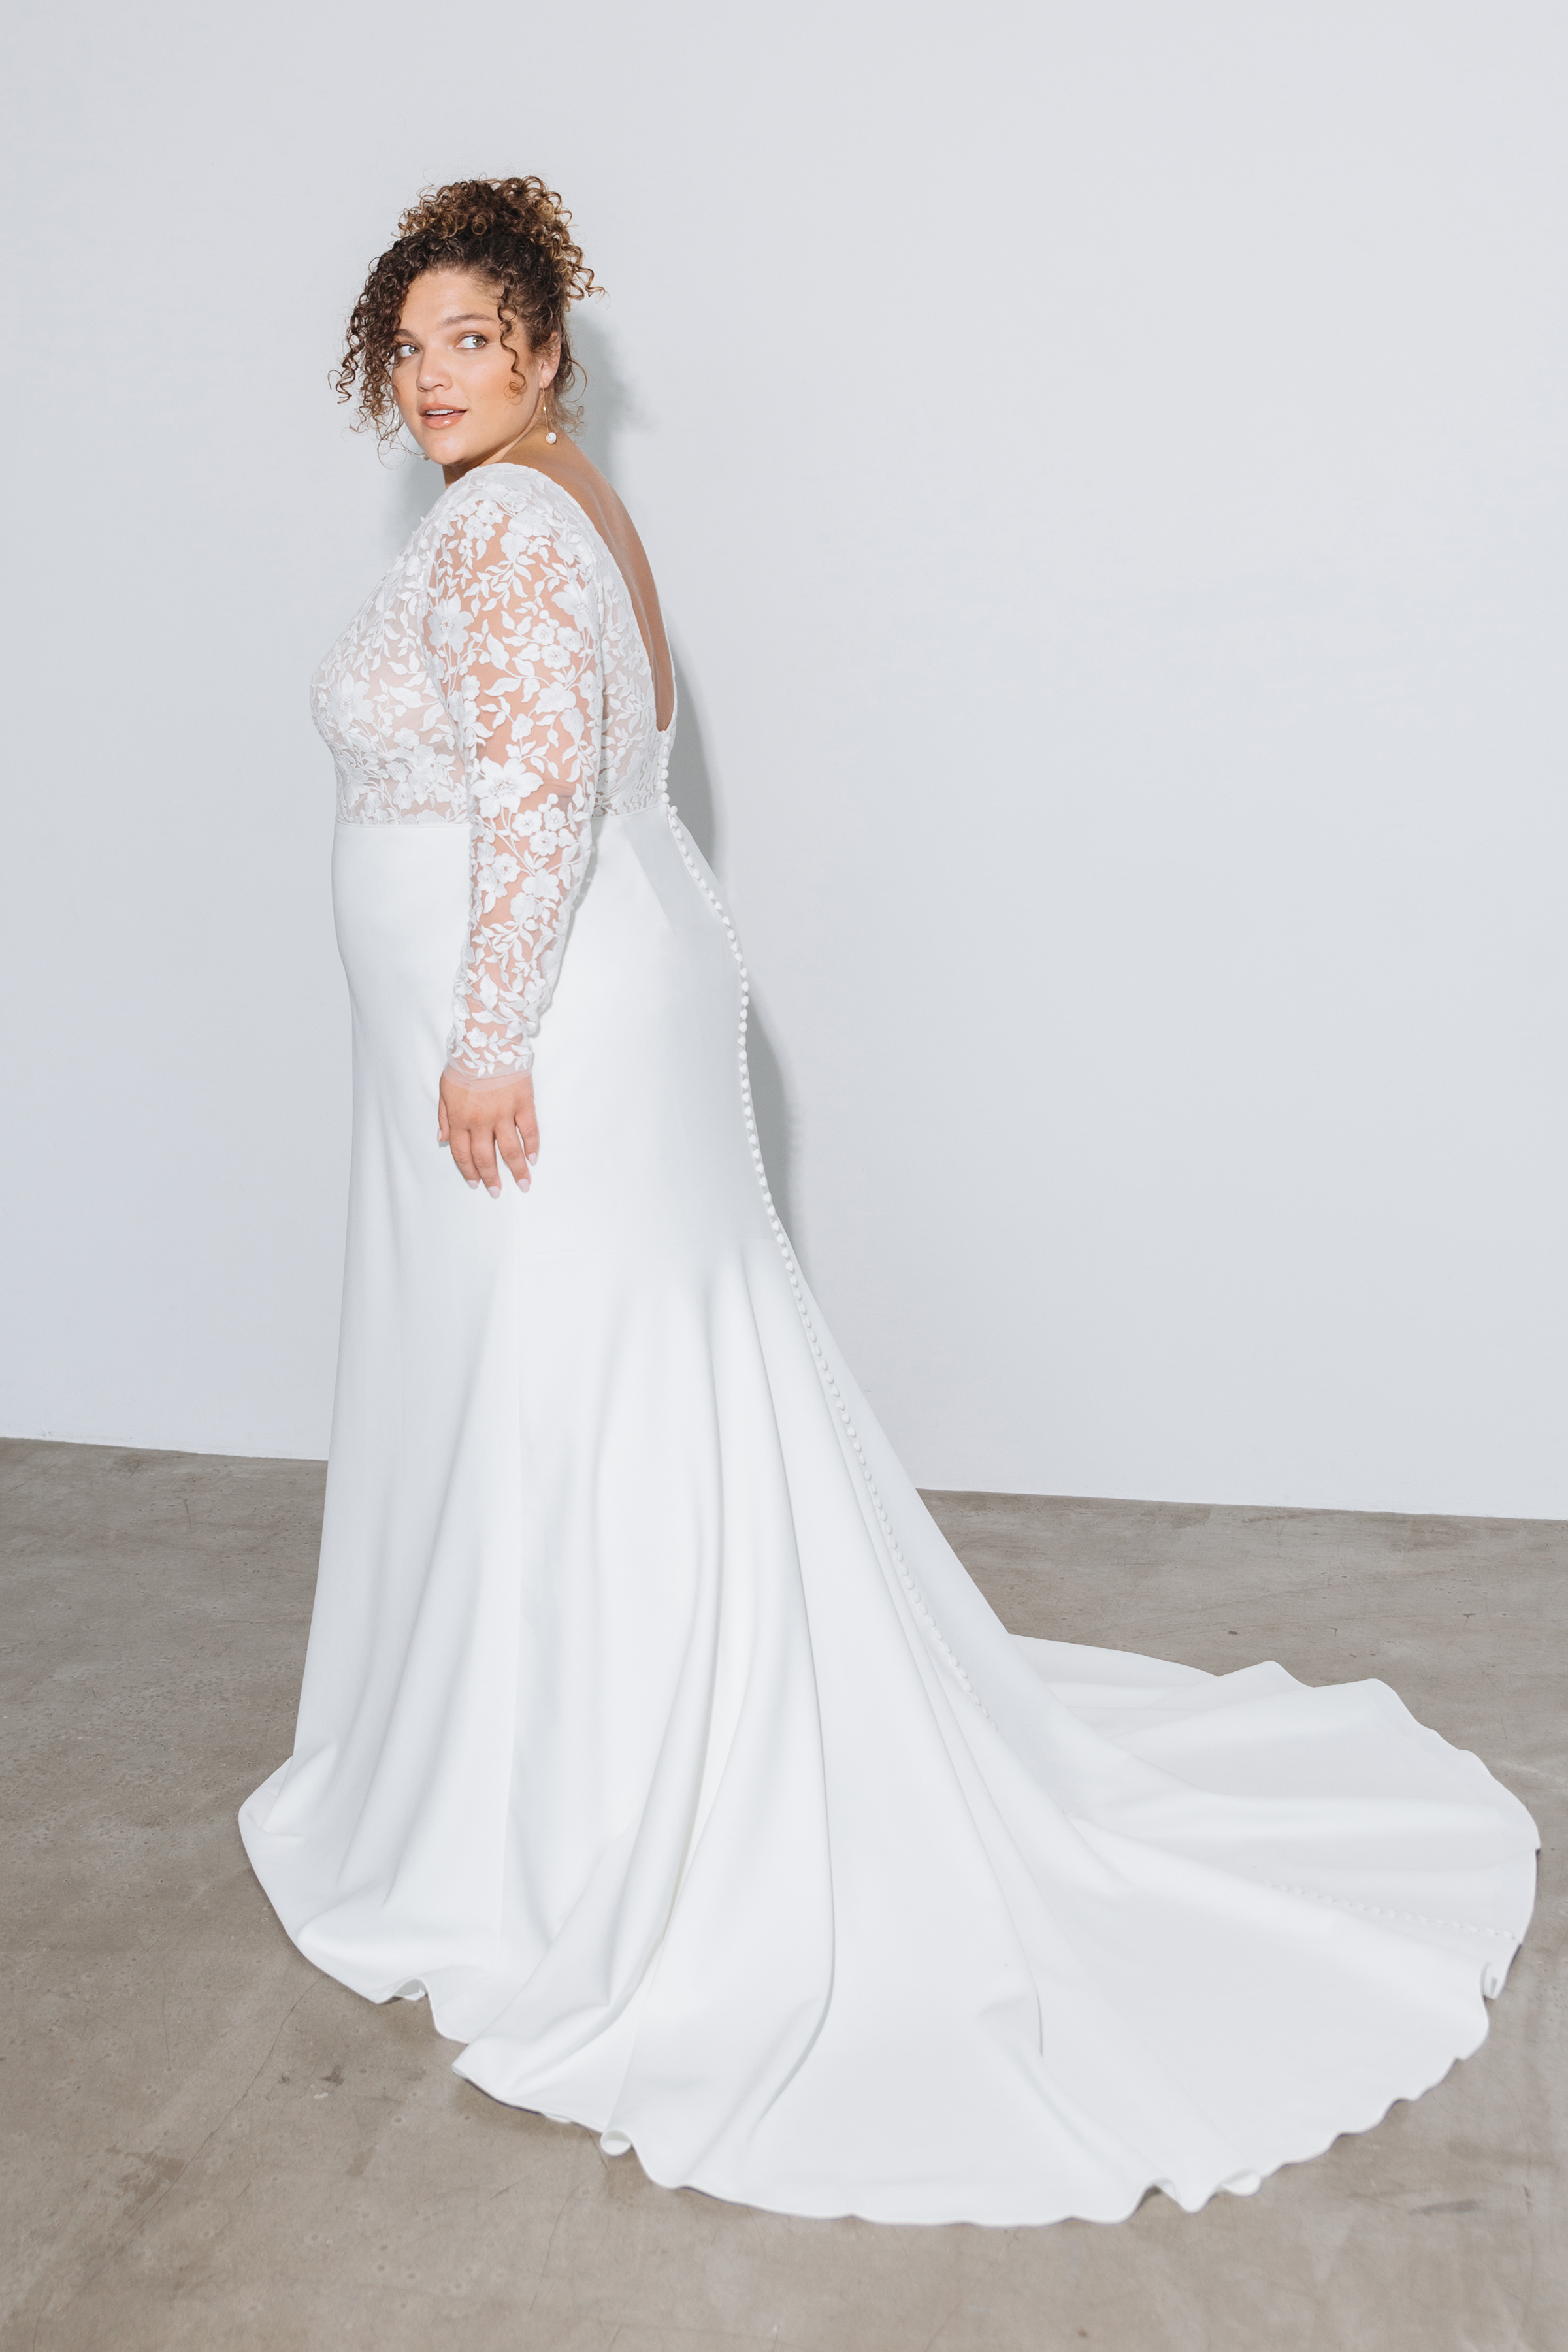 Dreams Plus - Malta. PLUS SIZE DRESS WITH LACE AND